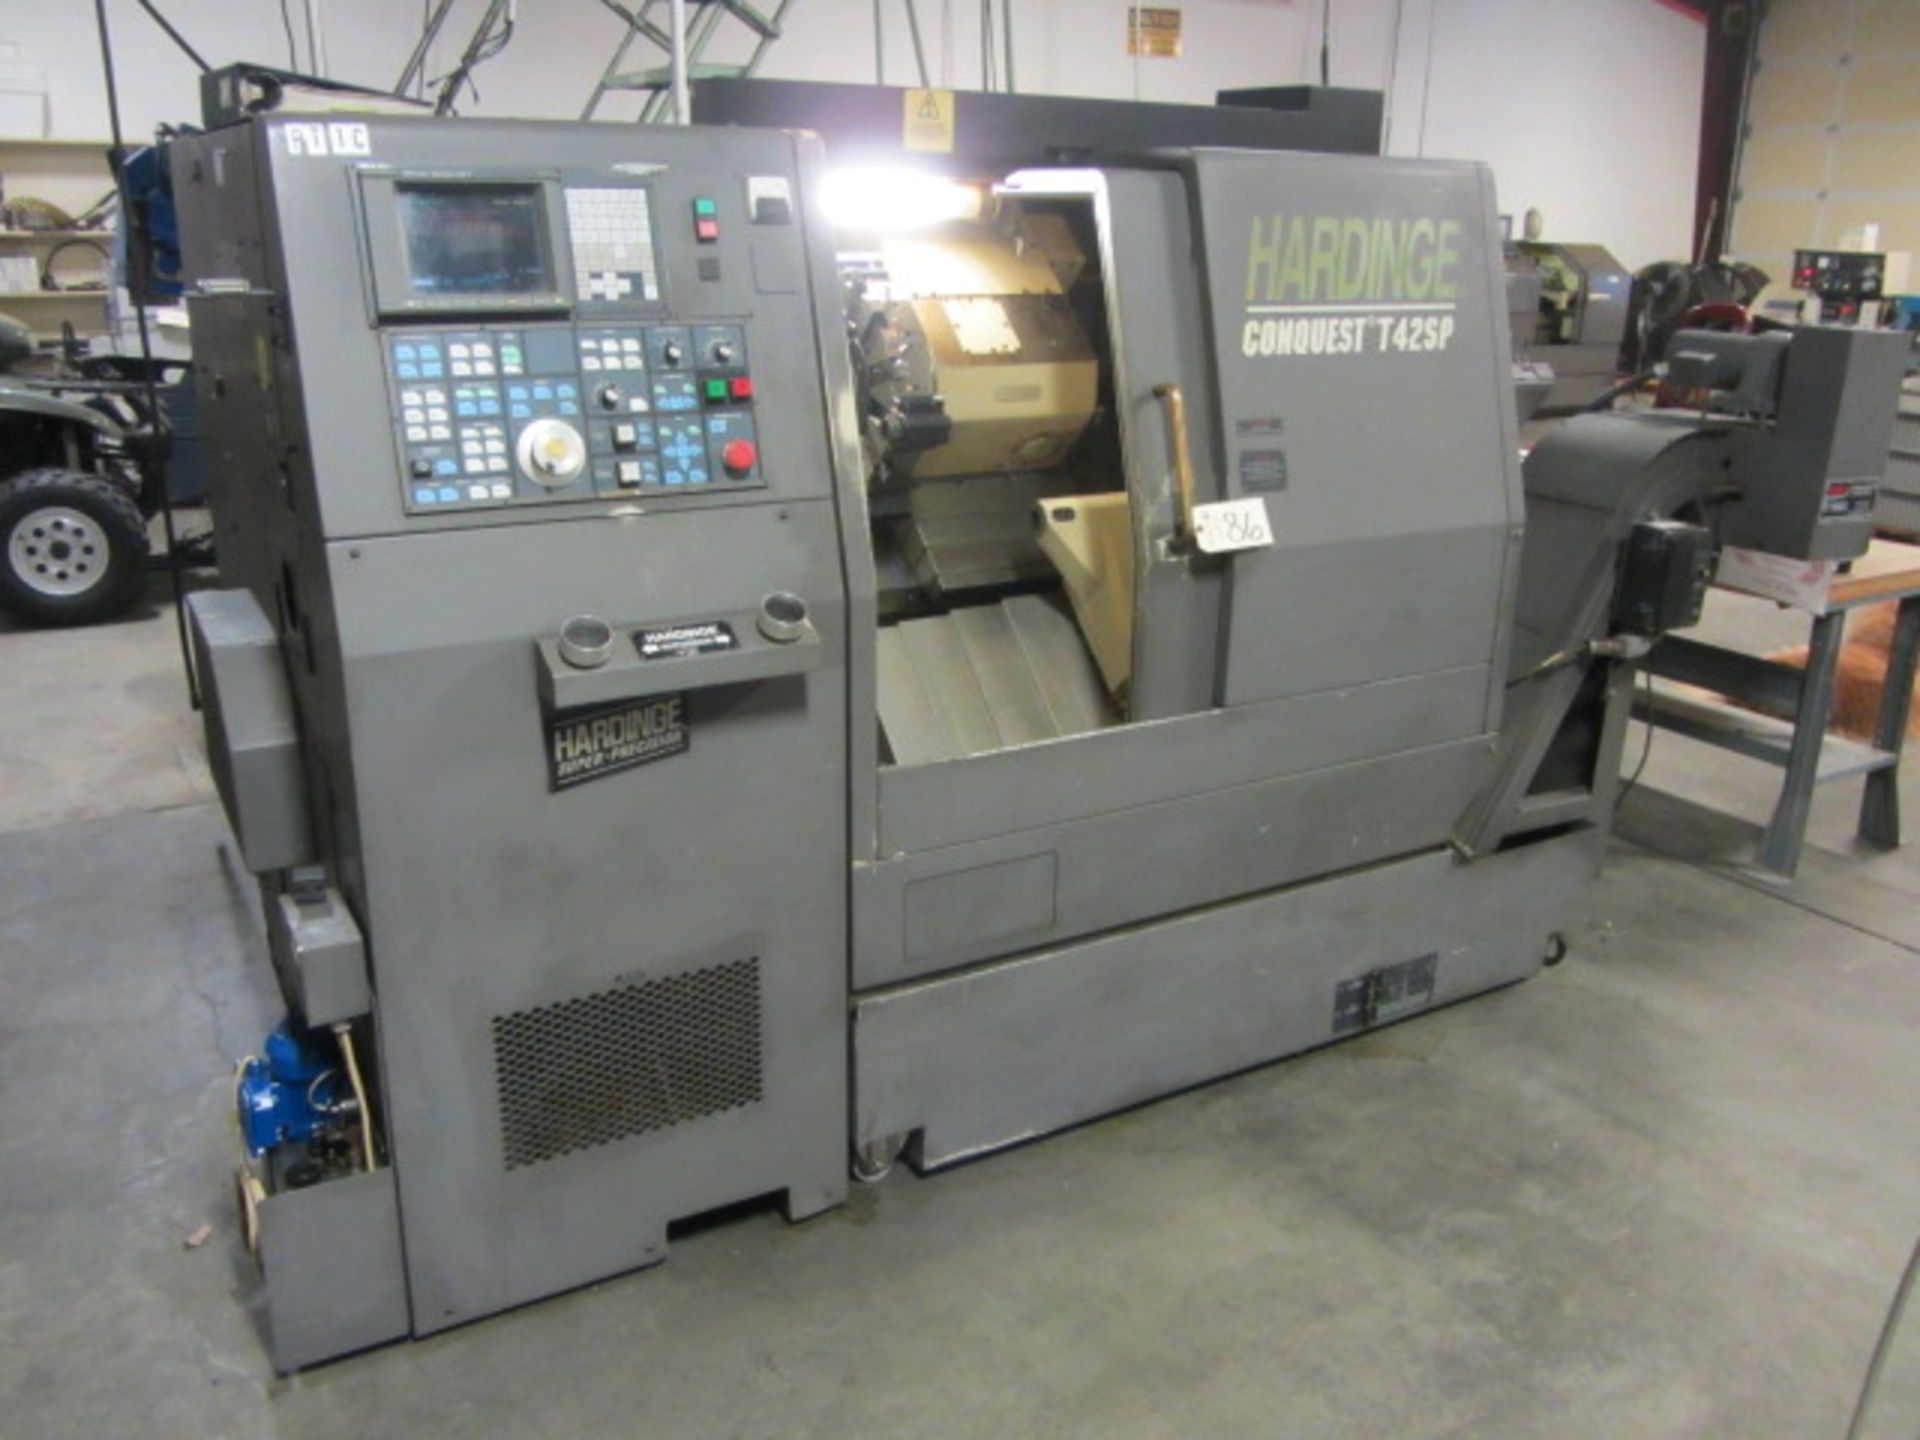 Hardinge Conquest T42SP CNC Turning Center with Built-In 16J Collet Chuck, 26'' Max Distance to - Image 2 of 8